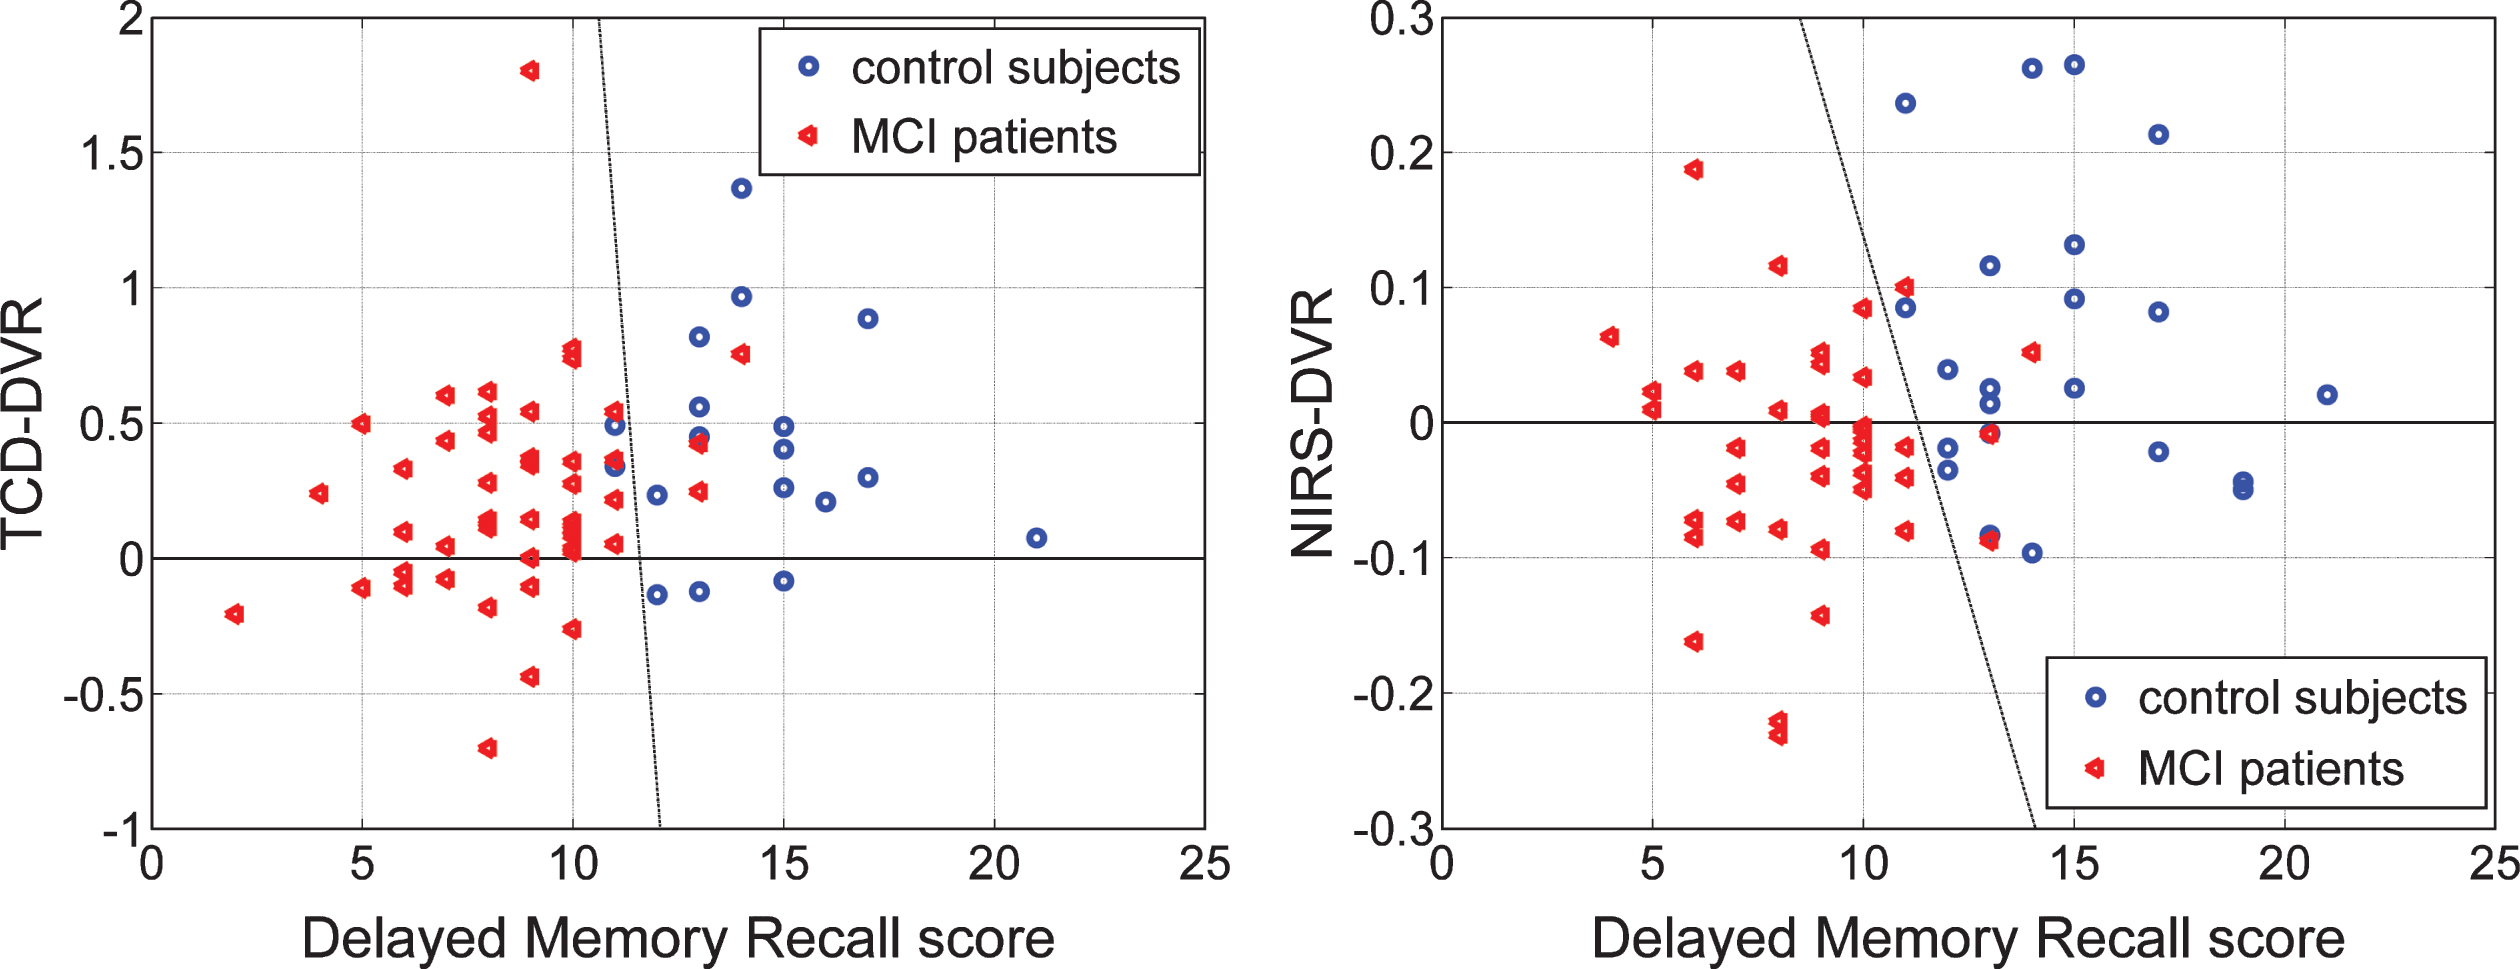 Scatter-plots of TCD-DVR versus Delayed Logical Memory Recall (DLMR) scores (left) for 18 controls (blue circles) and 45 patients (red triangles), and NIRS-DVR versus DLMR scores (right) for 22 controls (blue circles) and 42 patients (red triangles) for whom DLMR scores exist. The dashed lines suggest possible diagnostic indices that combine the DVR index with the DLMR score.